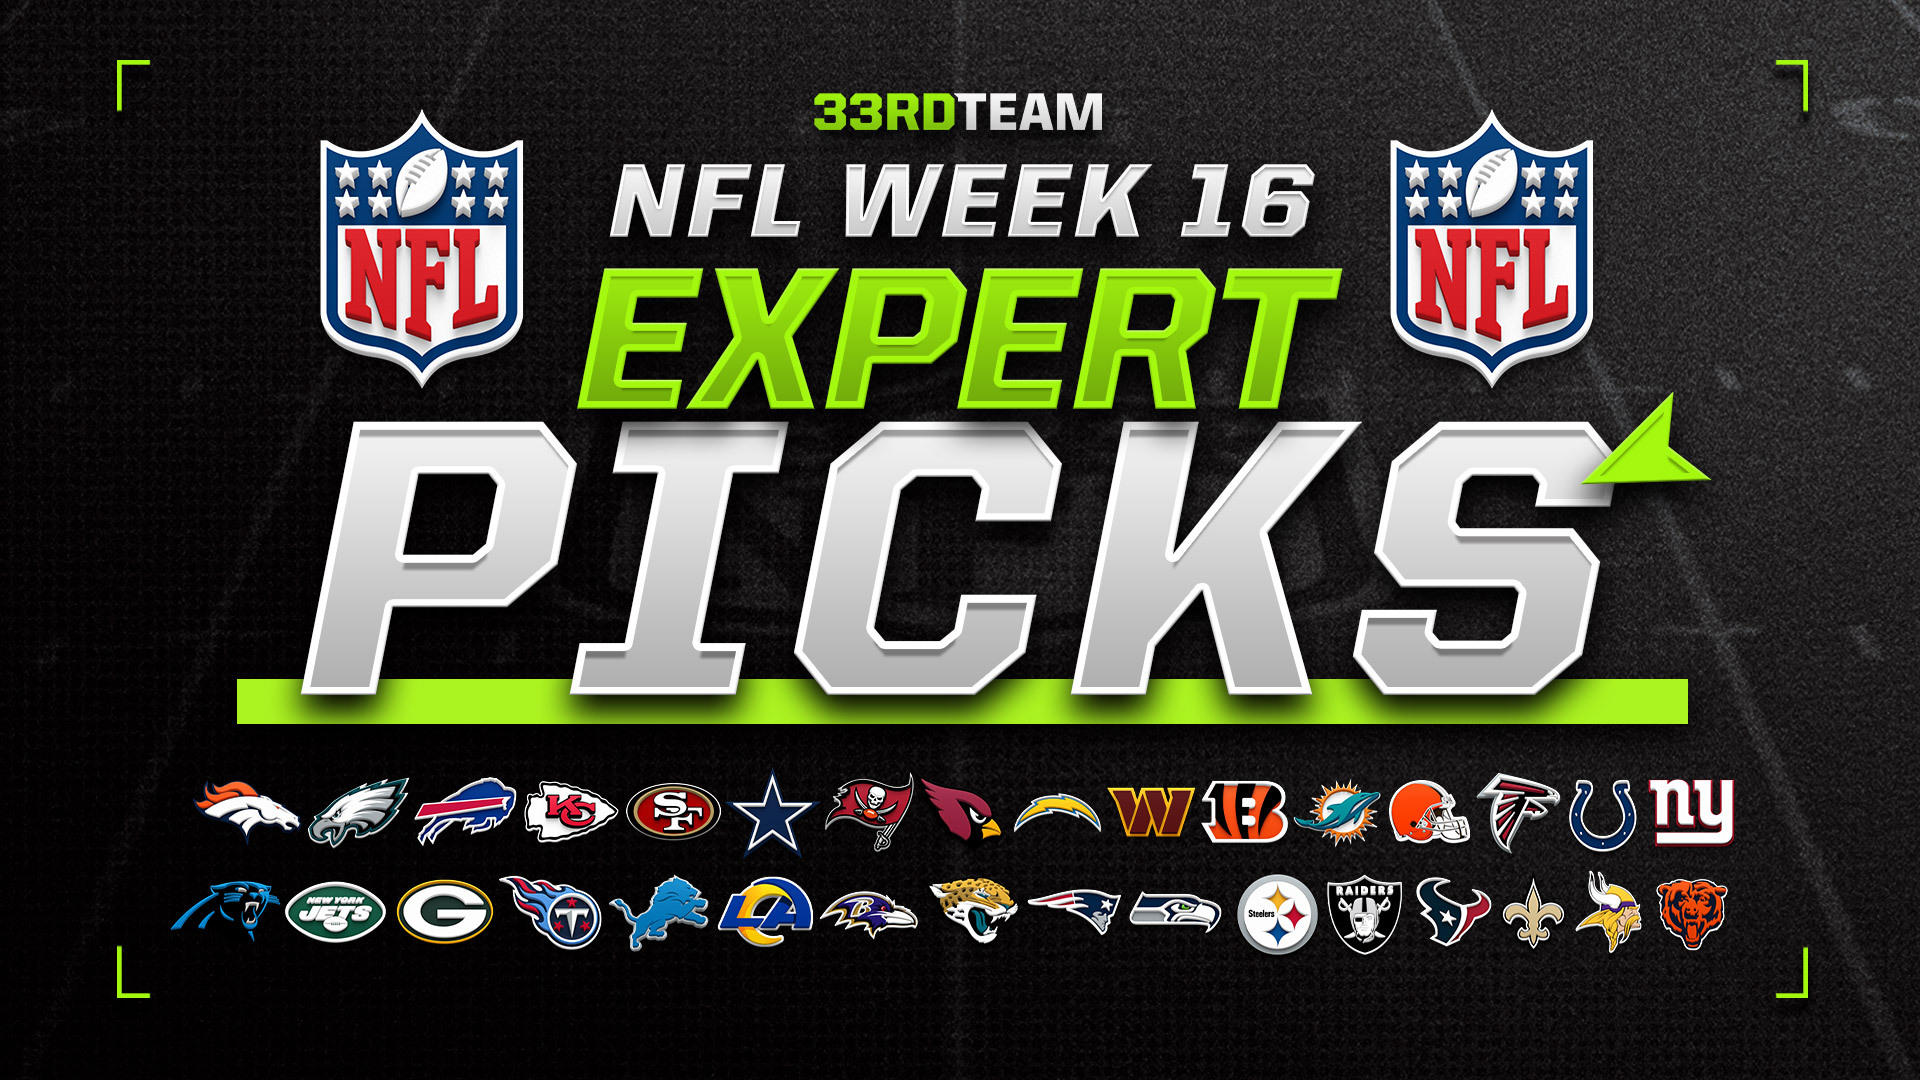 Text reads "NFL Week 16 Expert Picks" with icons of all 32 team logos